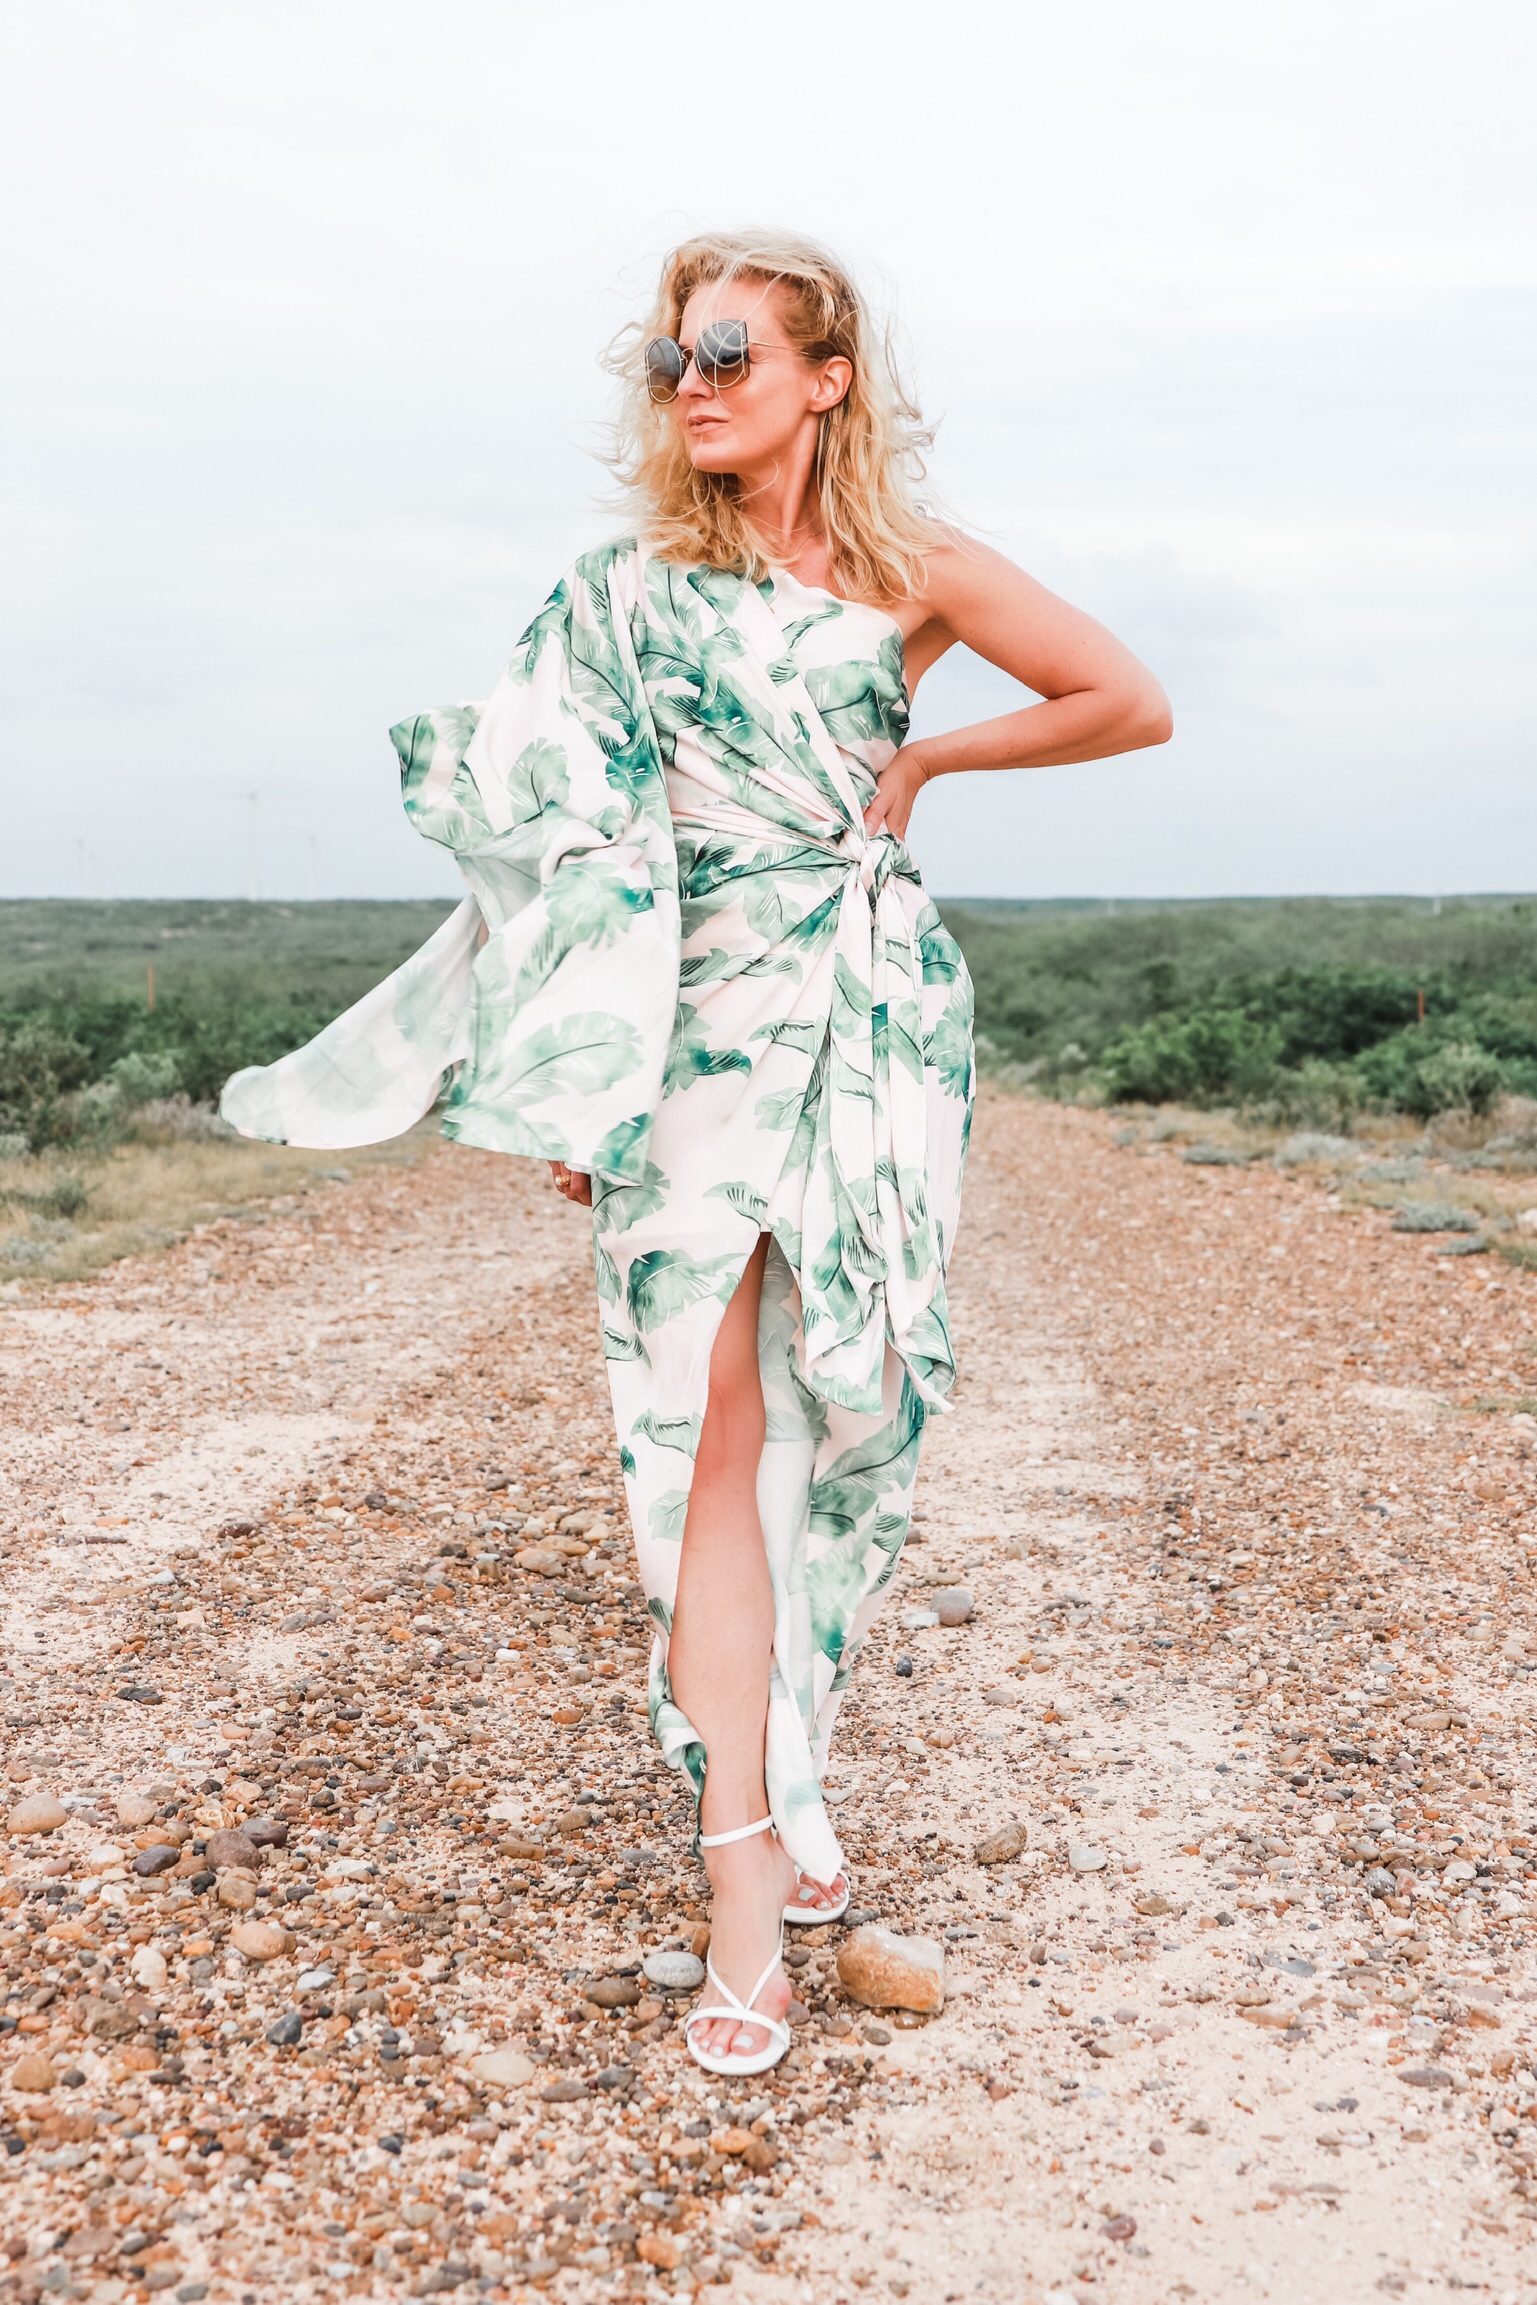 Palm Print Dress, fashion blogger Erin Busbee of Busbee Style wearing a pink and green palm print dress by Significant other with white sandals on a ranch in south Texas